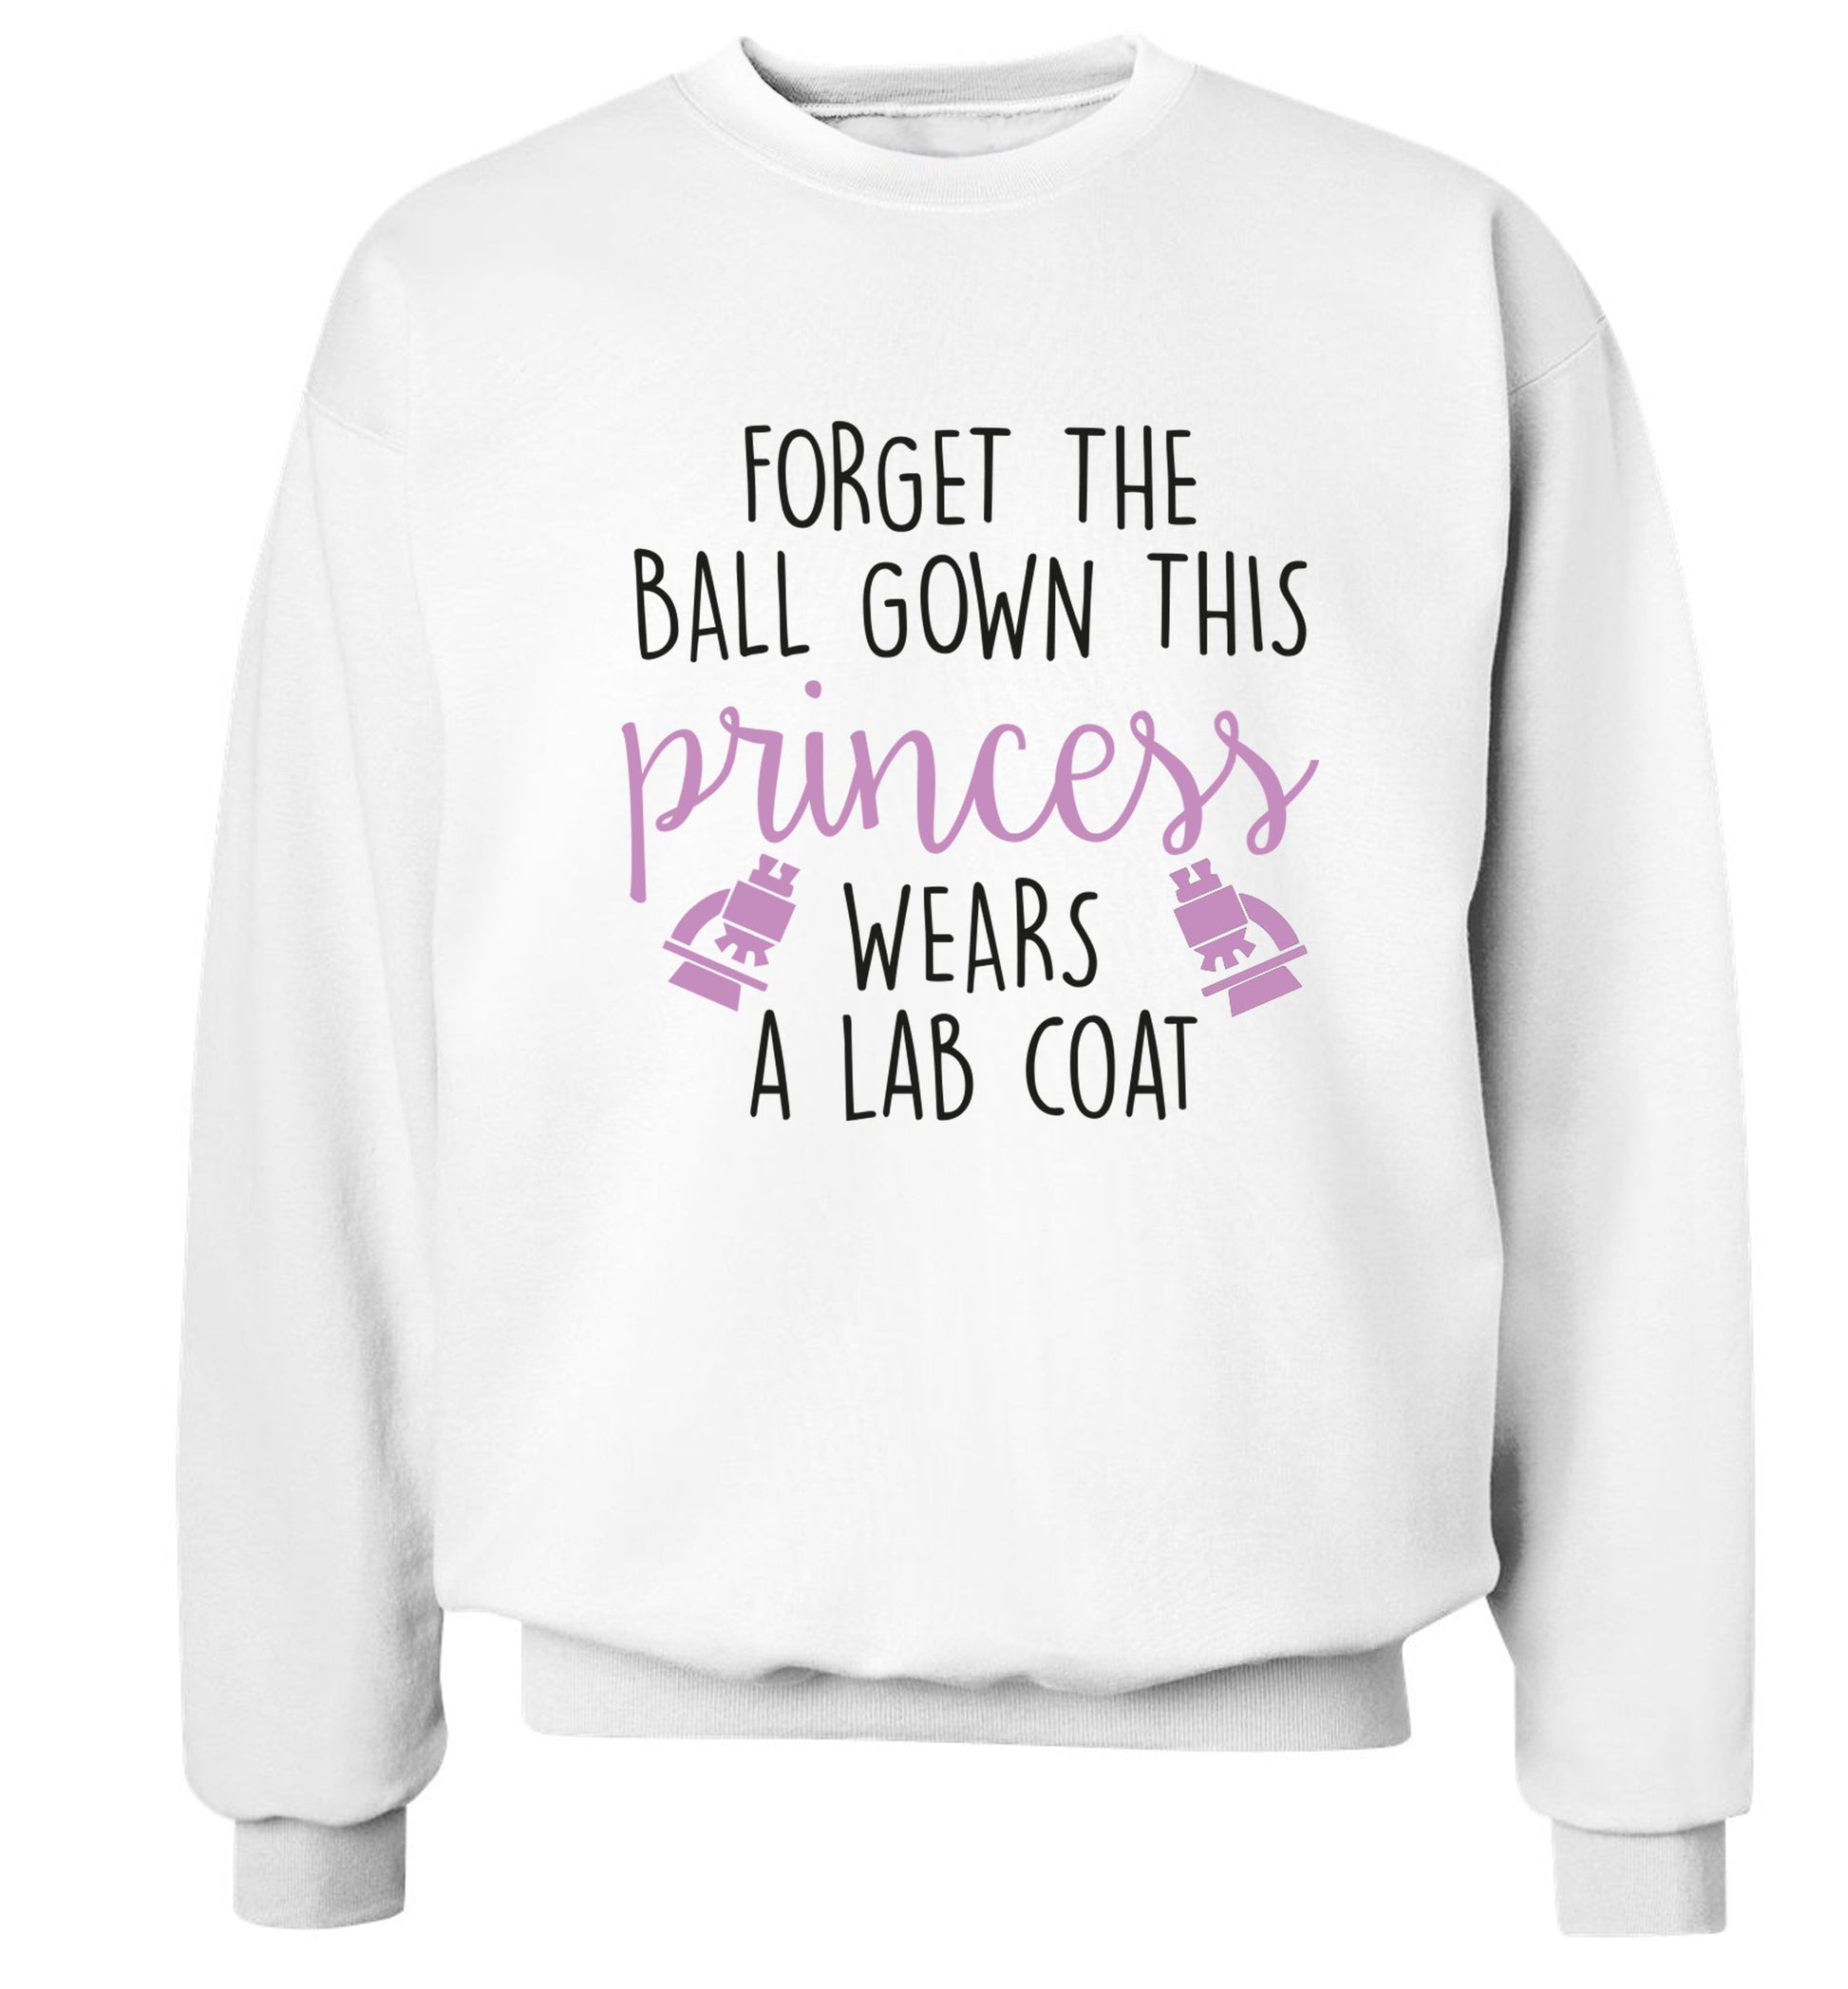 Forget the ball gown this princess wears a lab coat Adult's unisex white Sweater 2XL